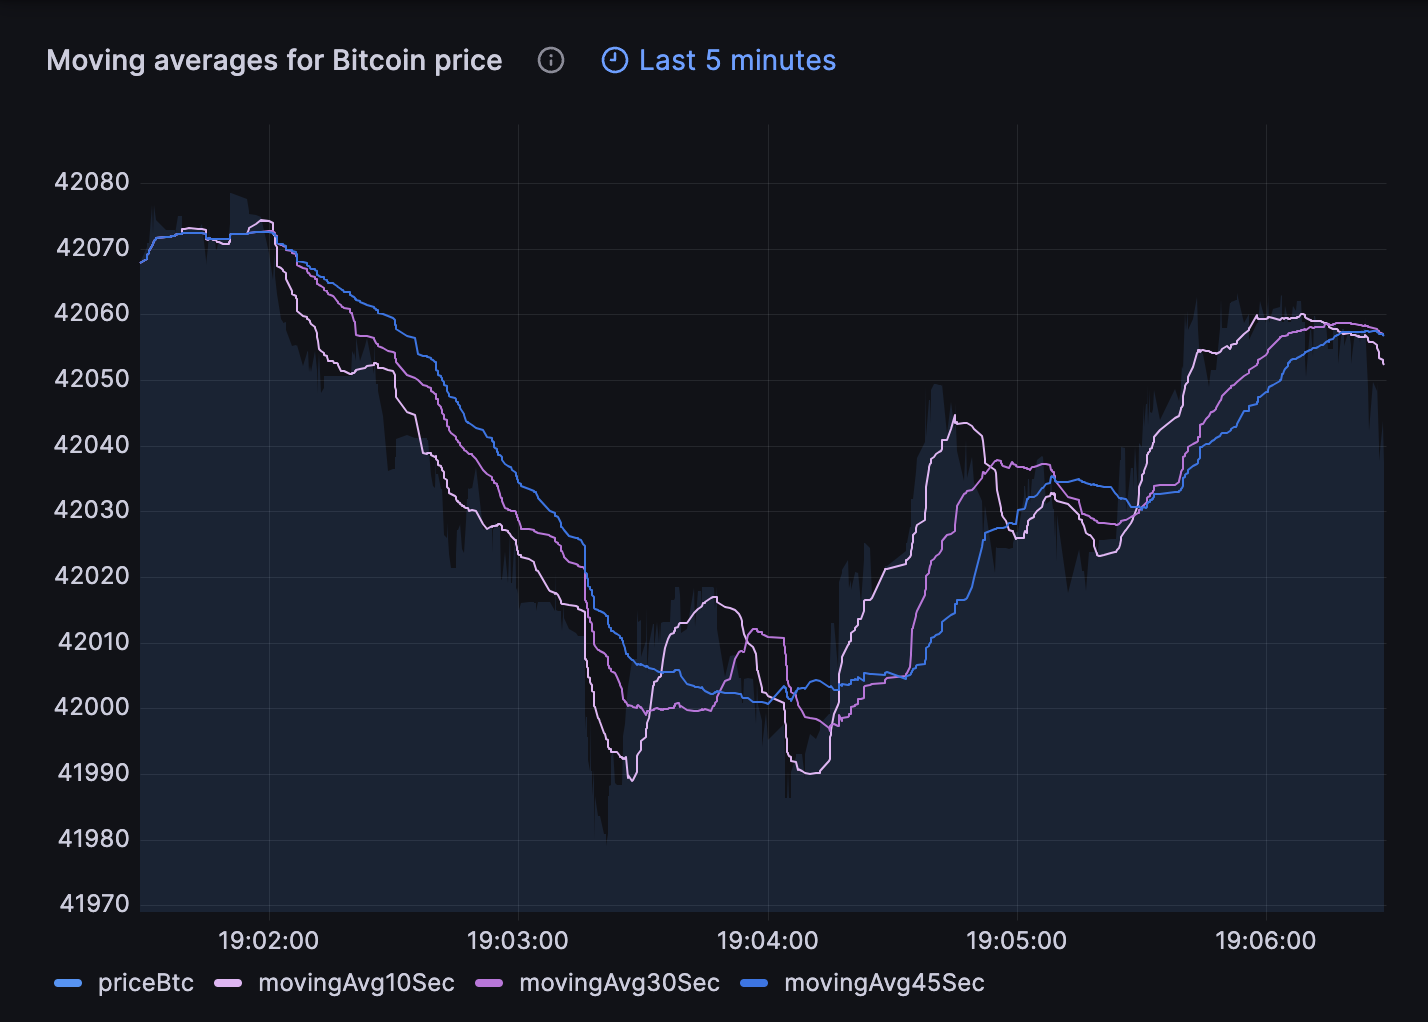 Chart showing Bitcoin price moving average